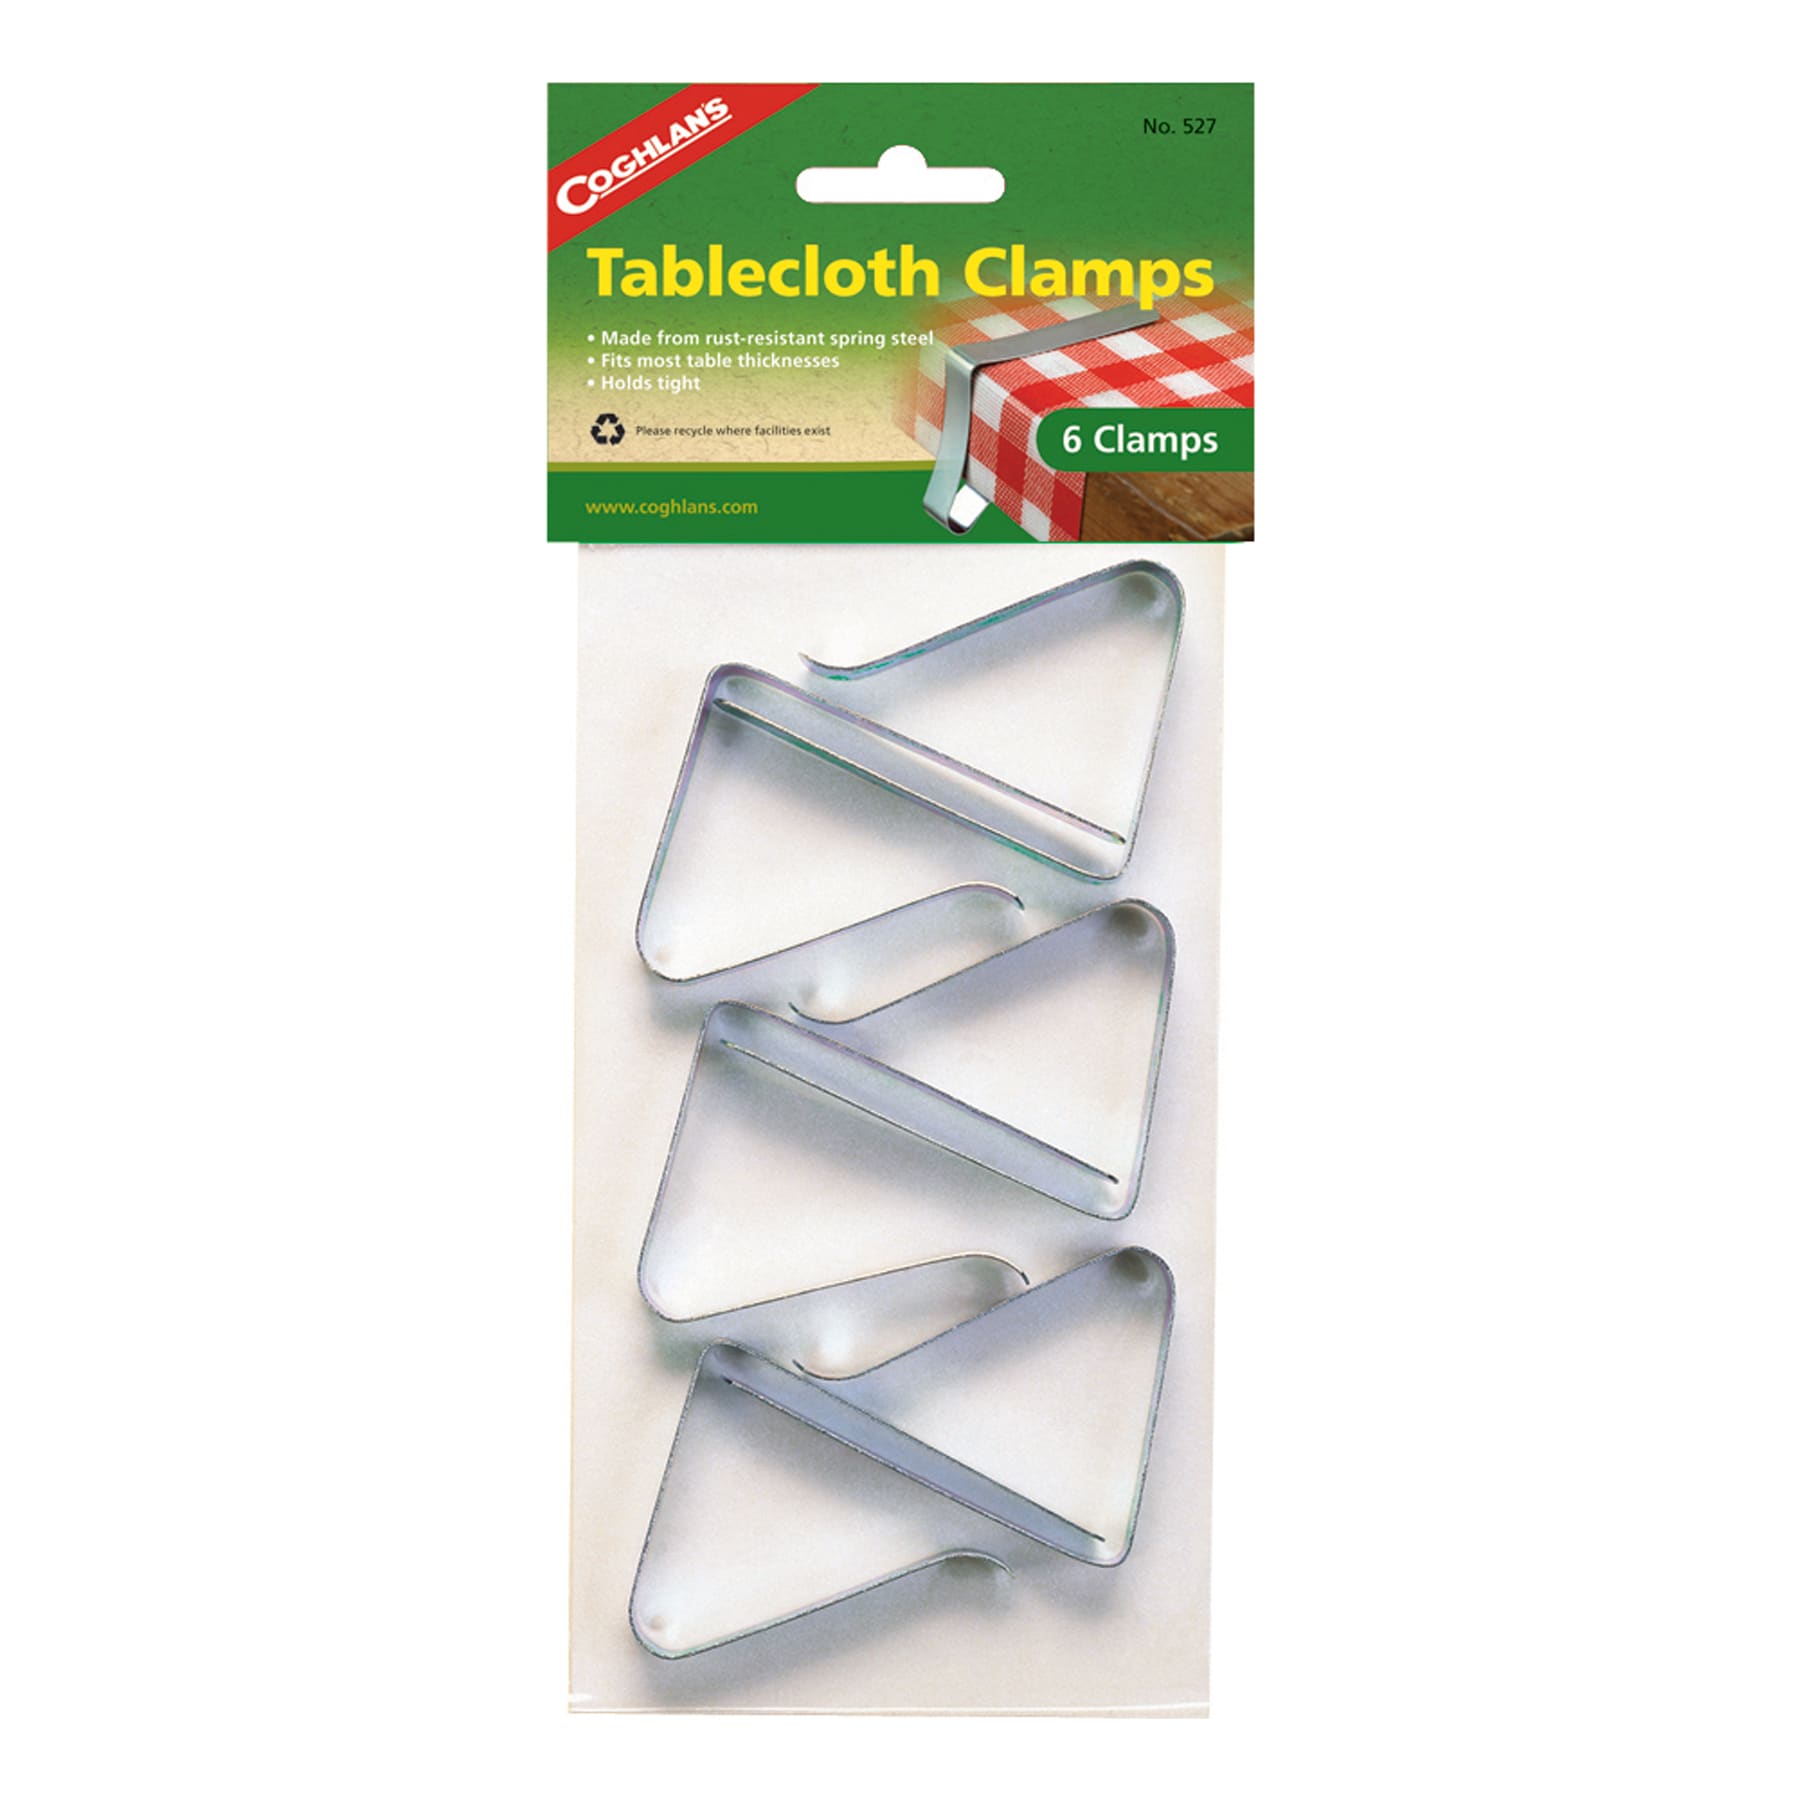 Coghlan's Tablecloth Clamps